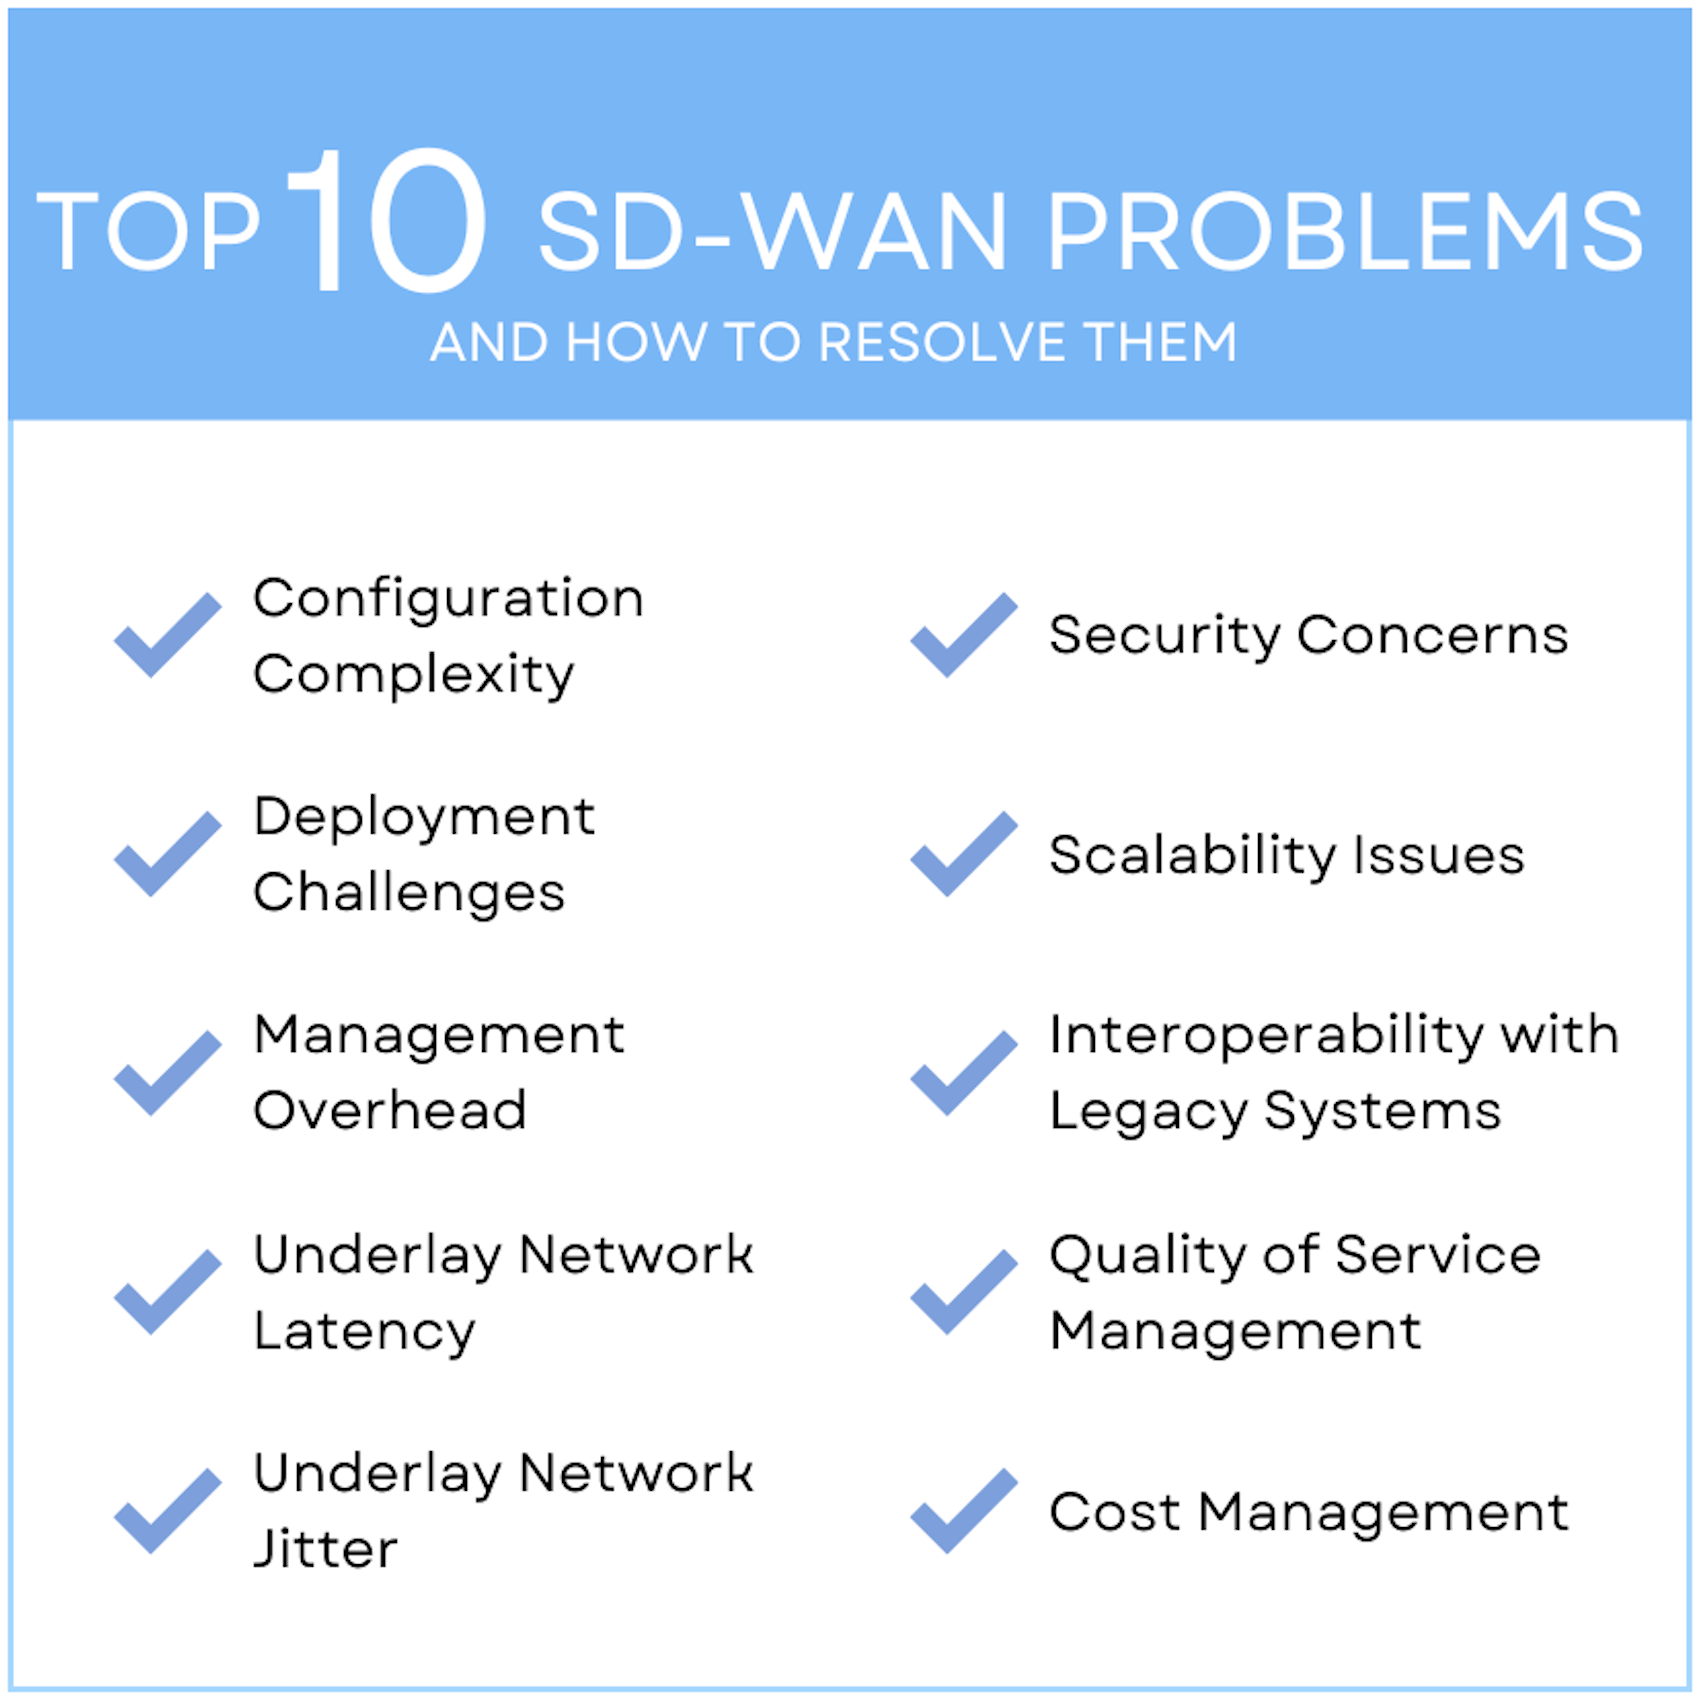 What are the Top 10 SD-WAN Problems?